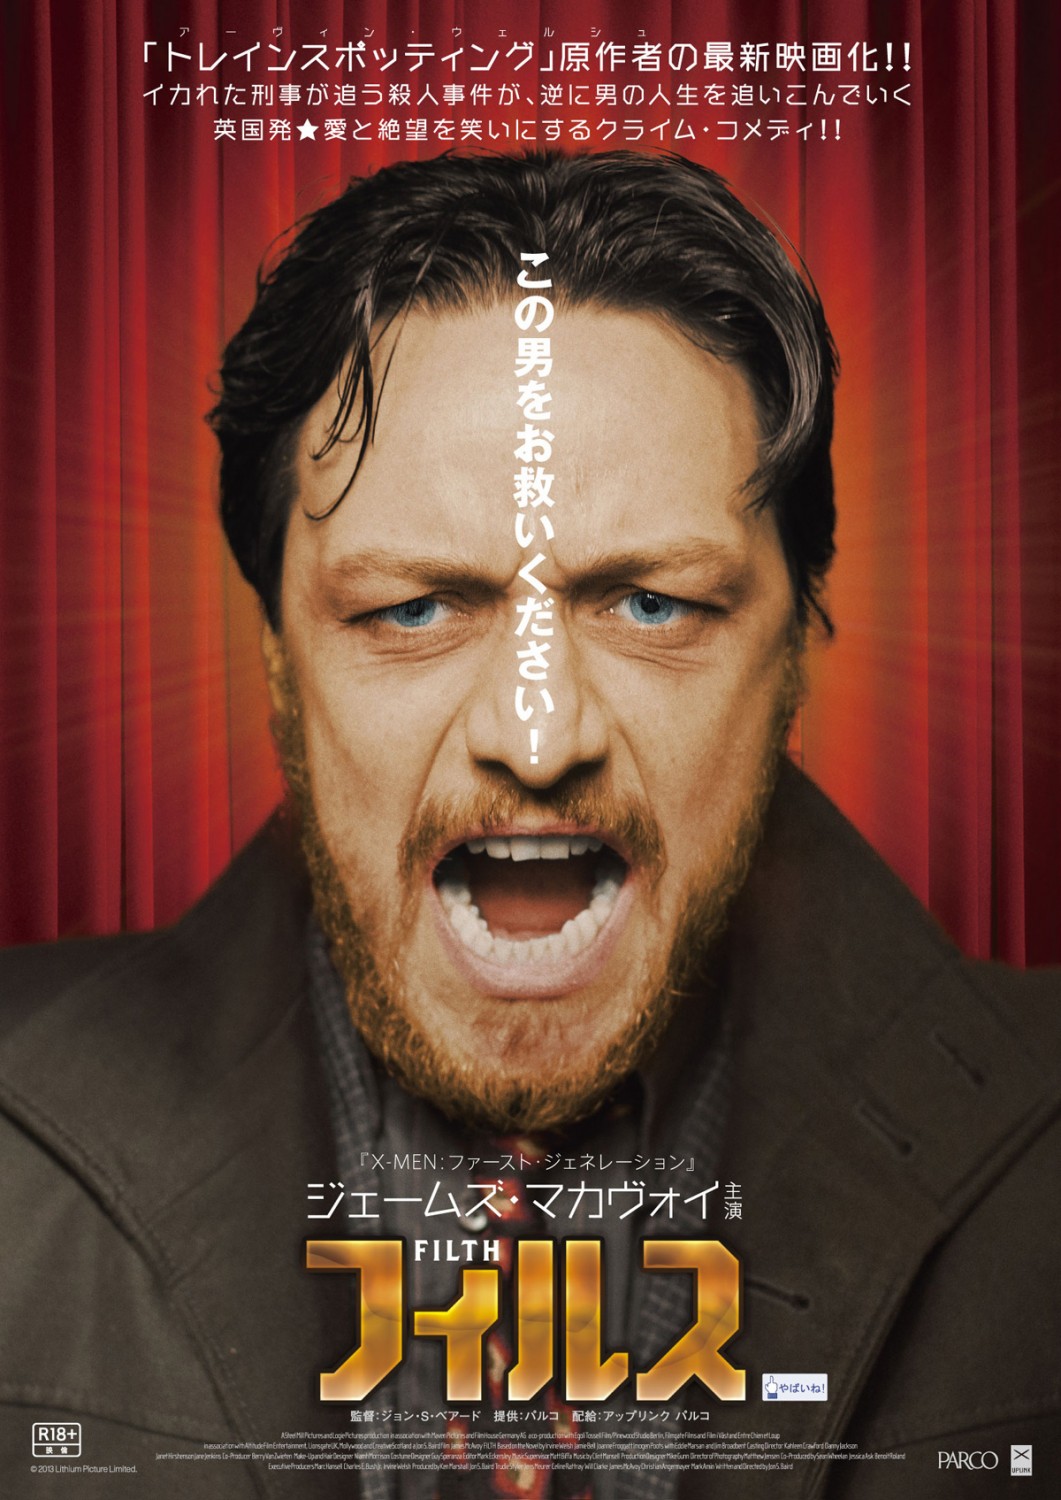 Extra Large Movie Poster Image for Filth (#7 of 8)